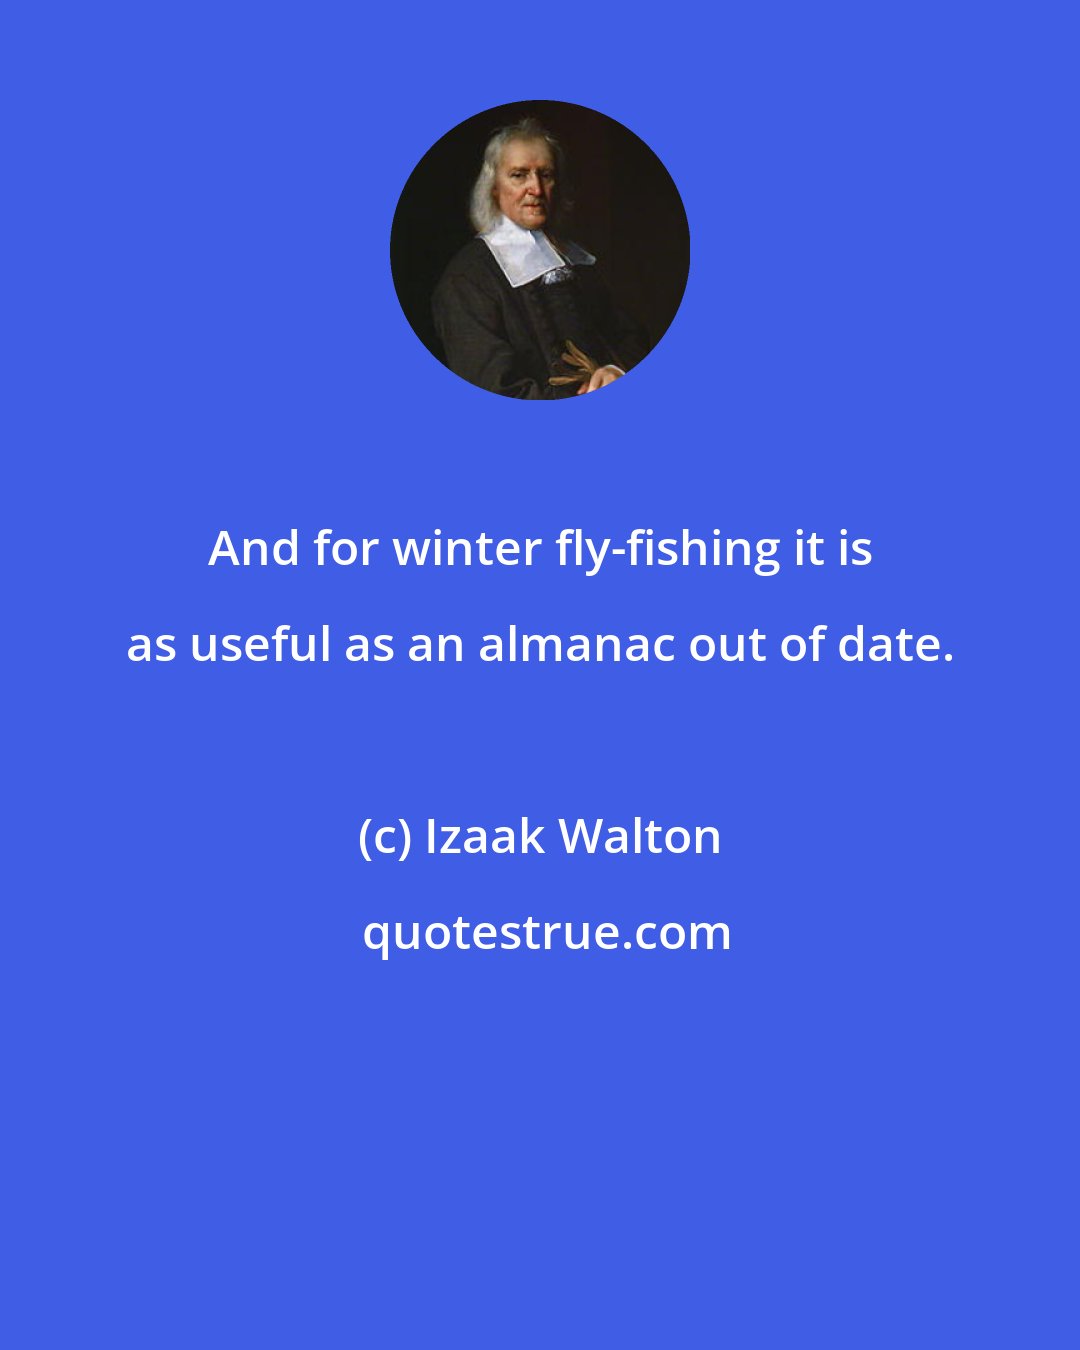 Izaak Walton: And for winter fly-fishing it is as useful as an almanac out of date.